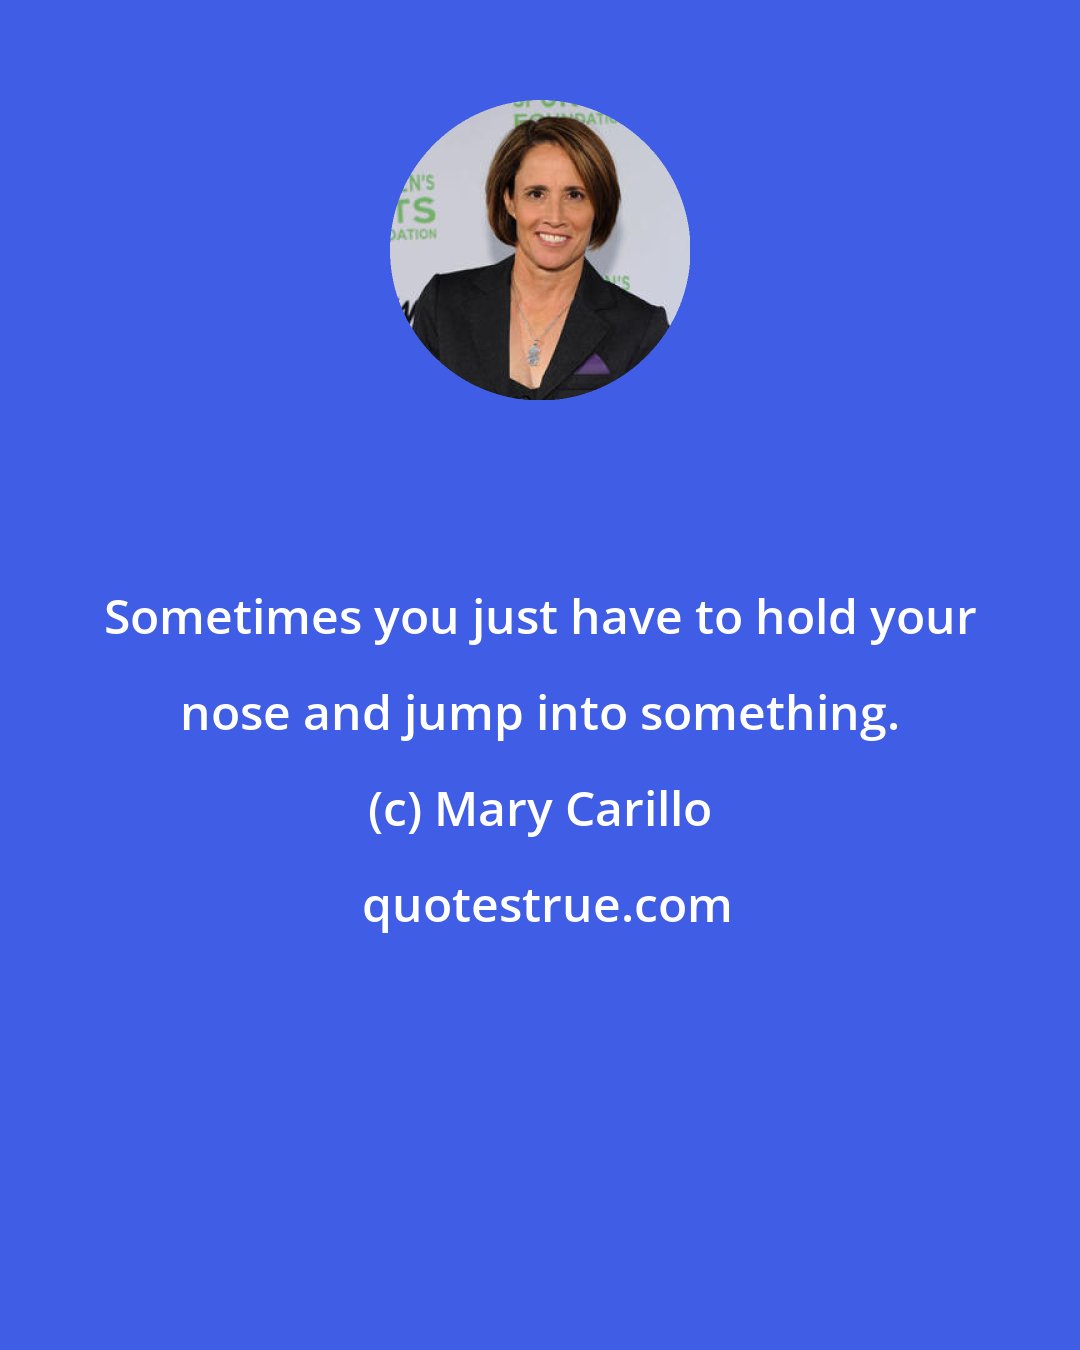 Mary Carillo: Sometimes you just have to hold your nose and jump into something.